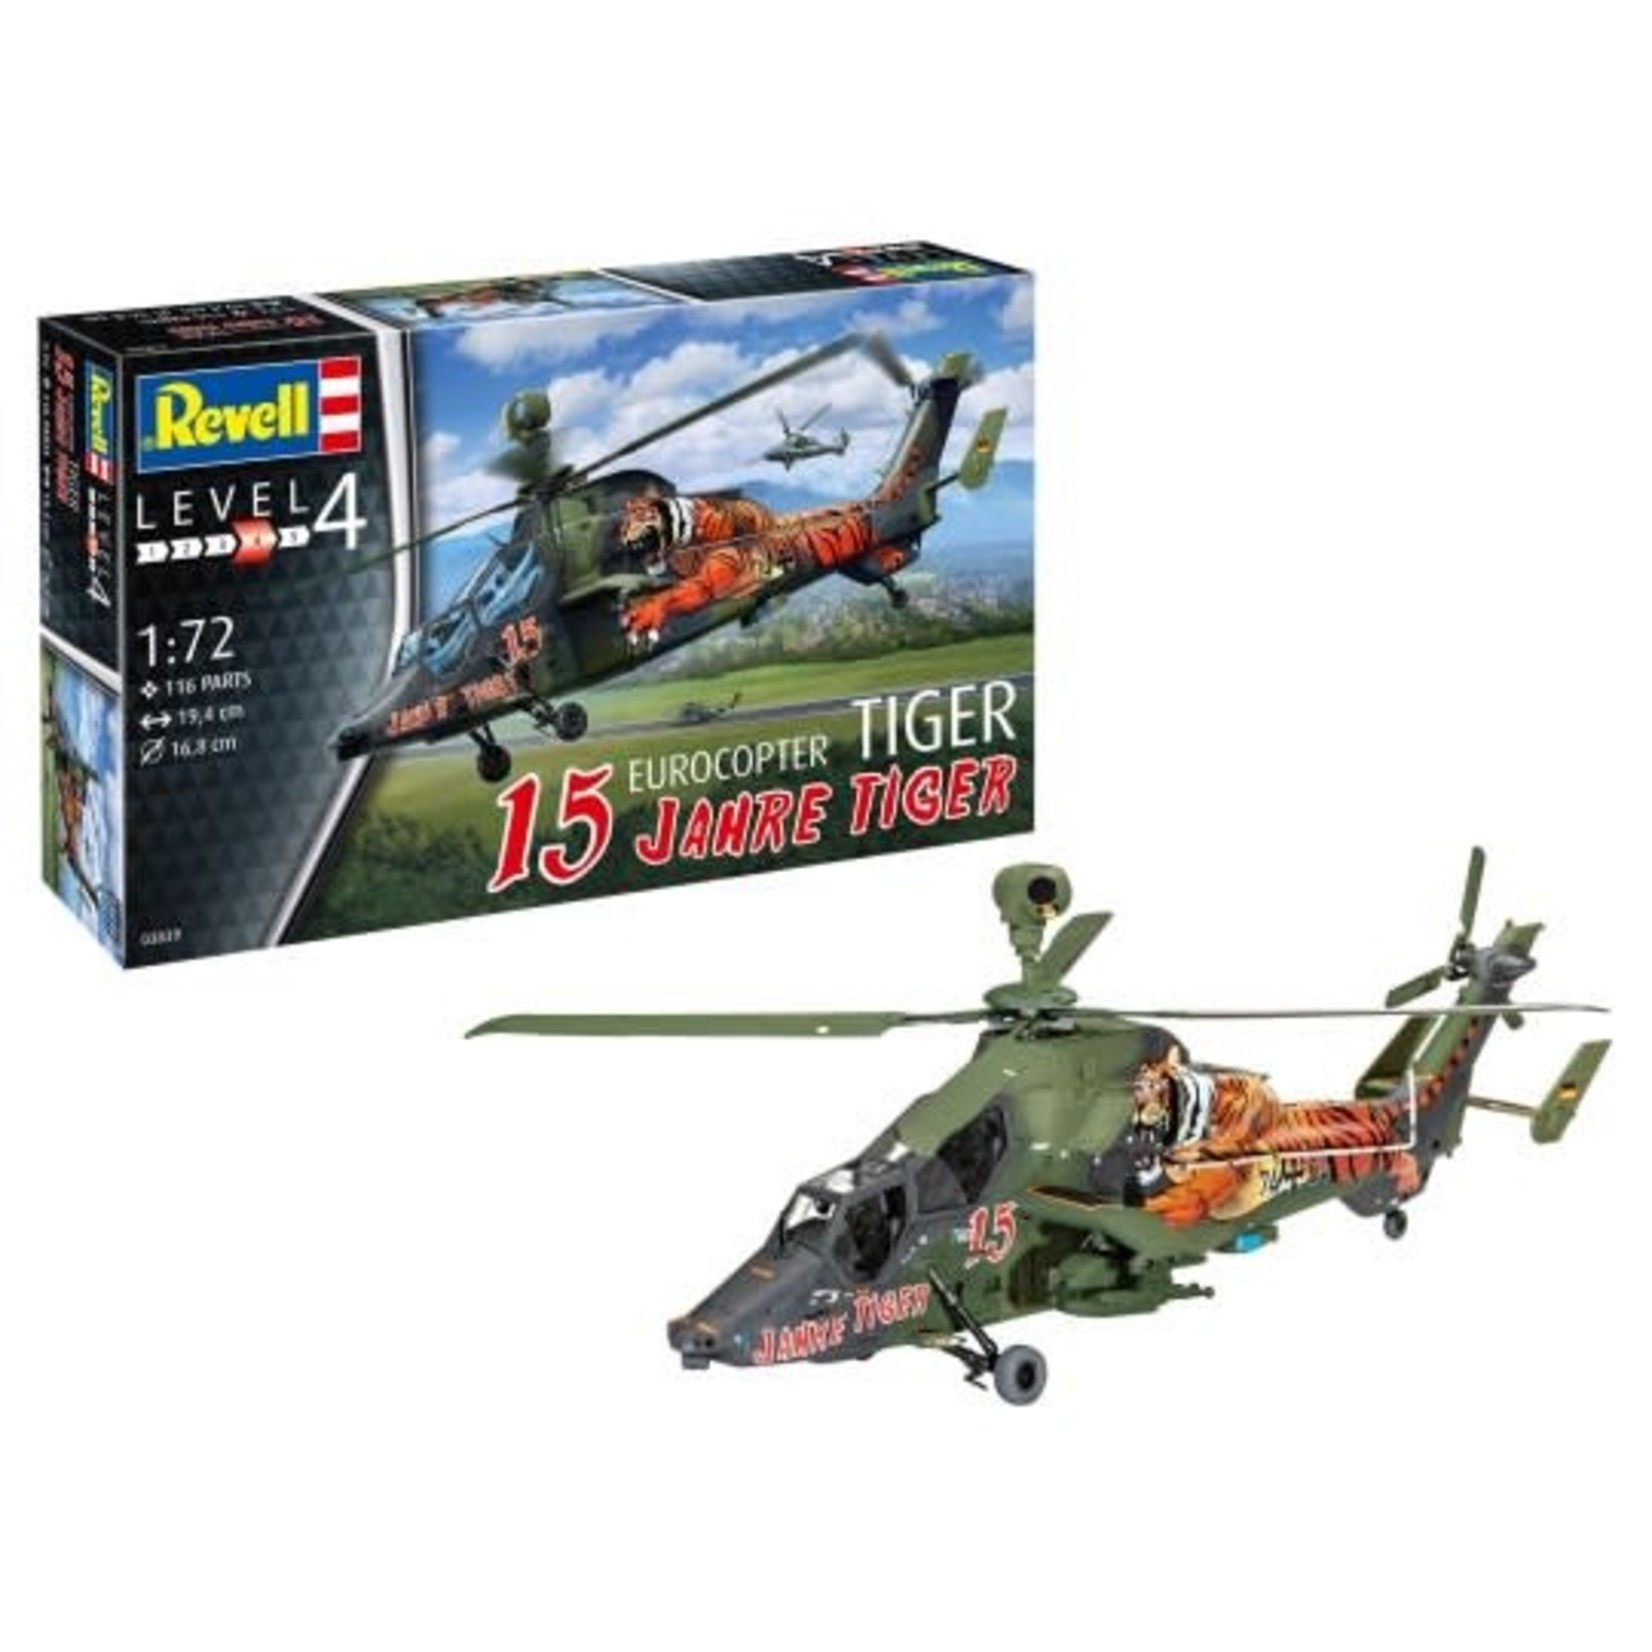 Revell Germany RVG3839 Jahre Tiger 15 Eurocopter (1/72)